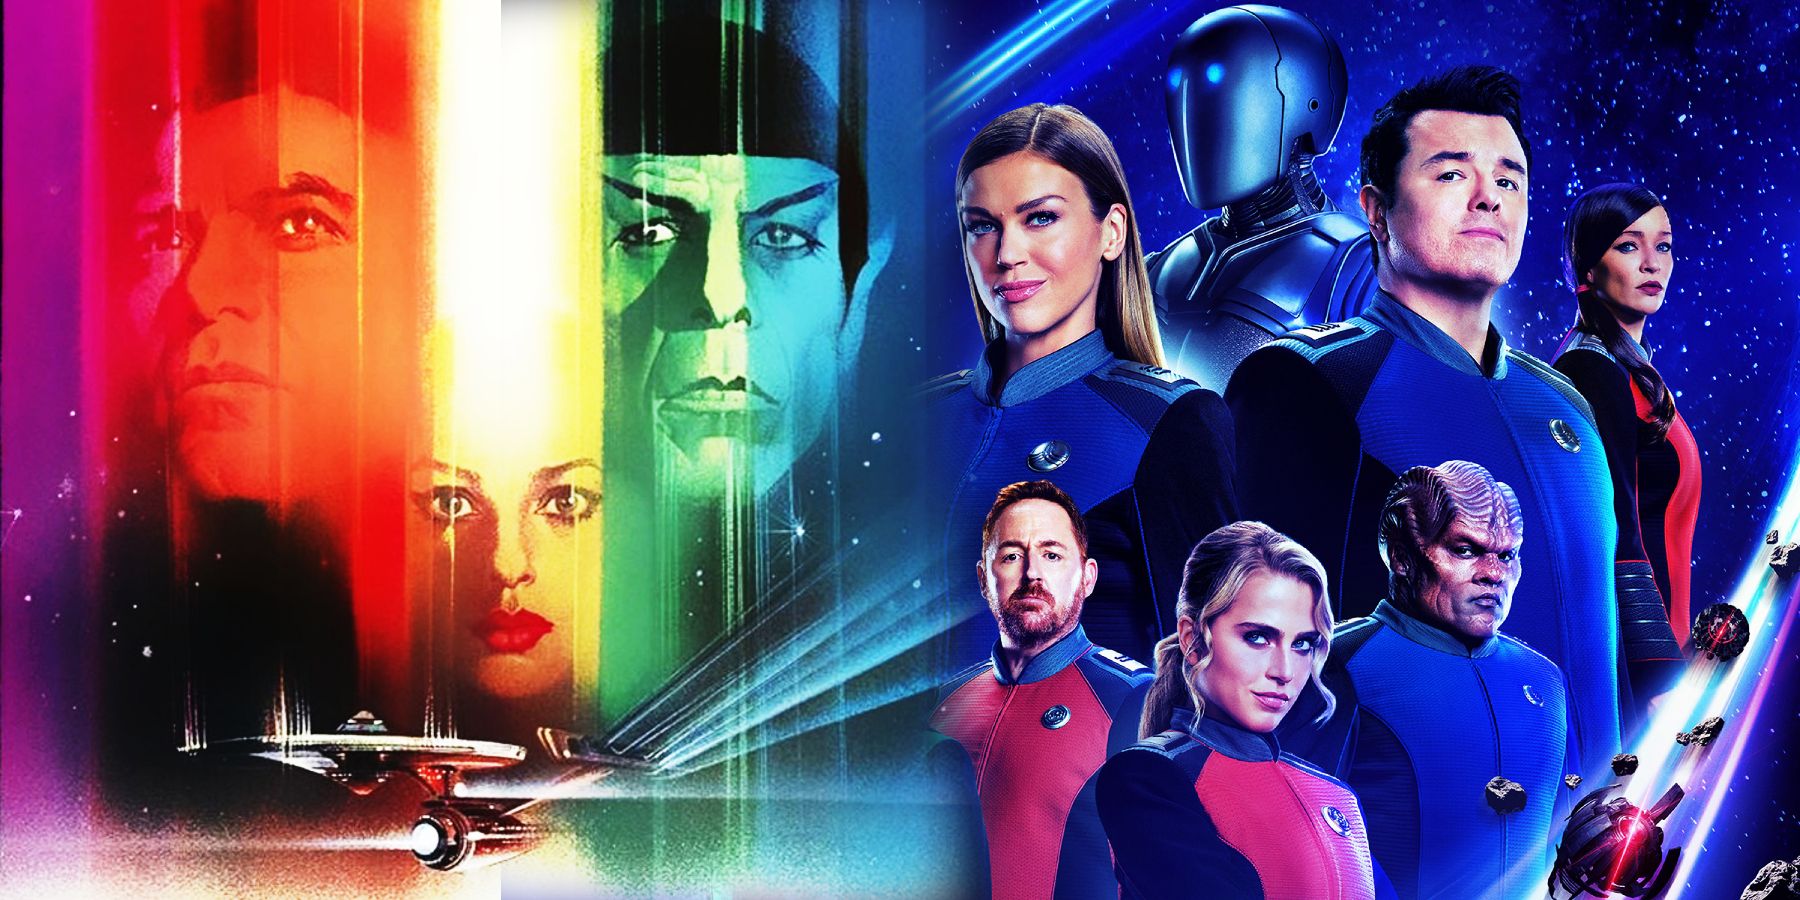 Star Trek Motion Picture Poster and Orville Season 3 poster